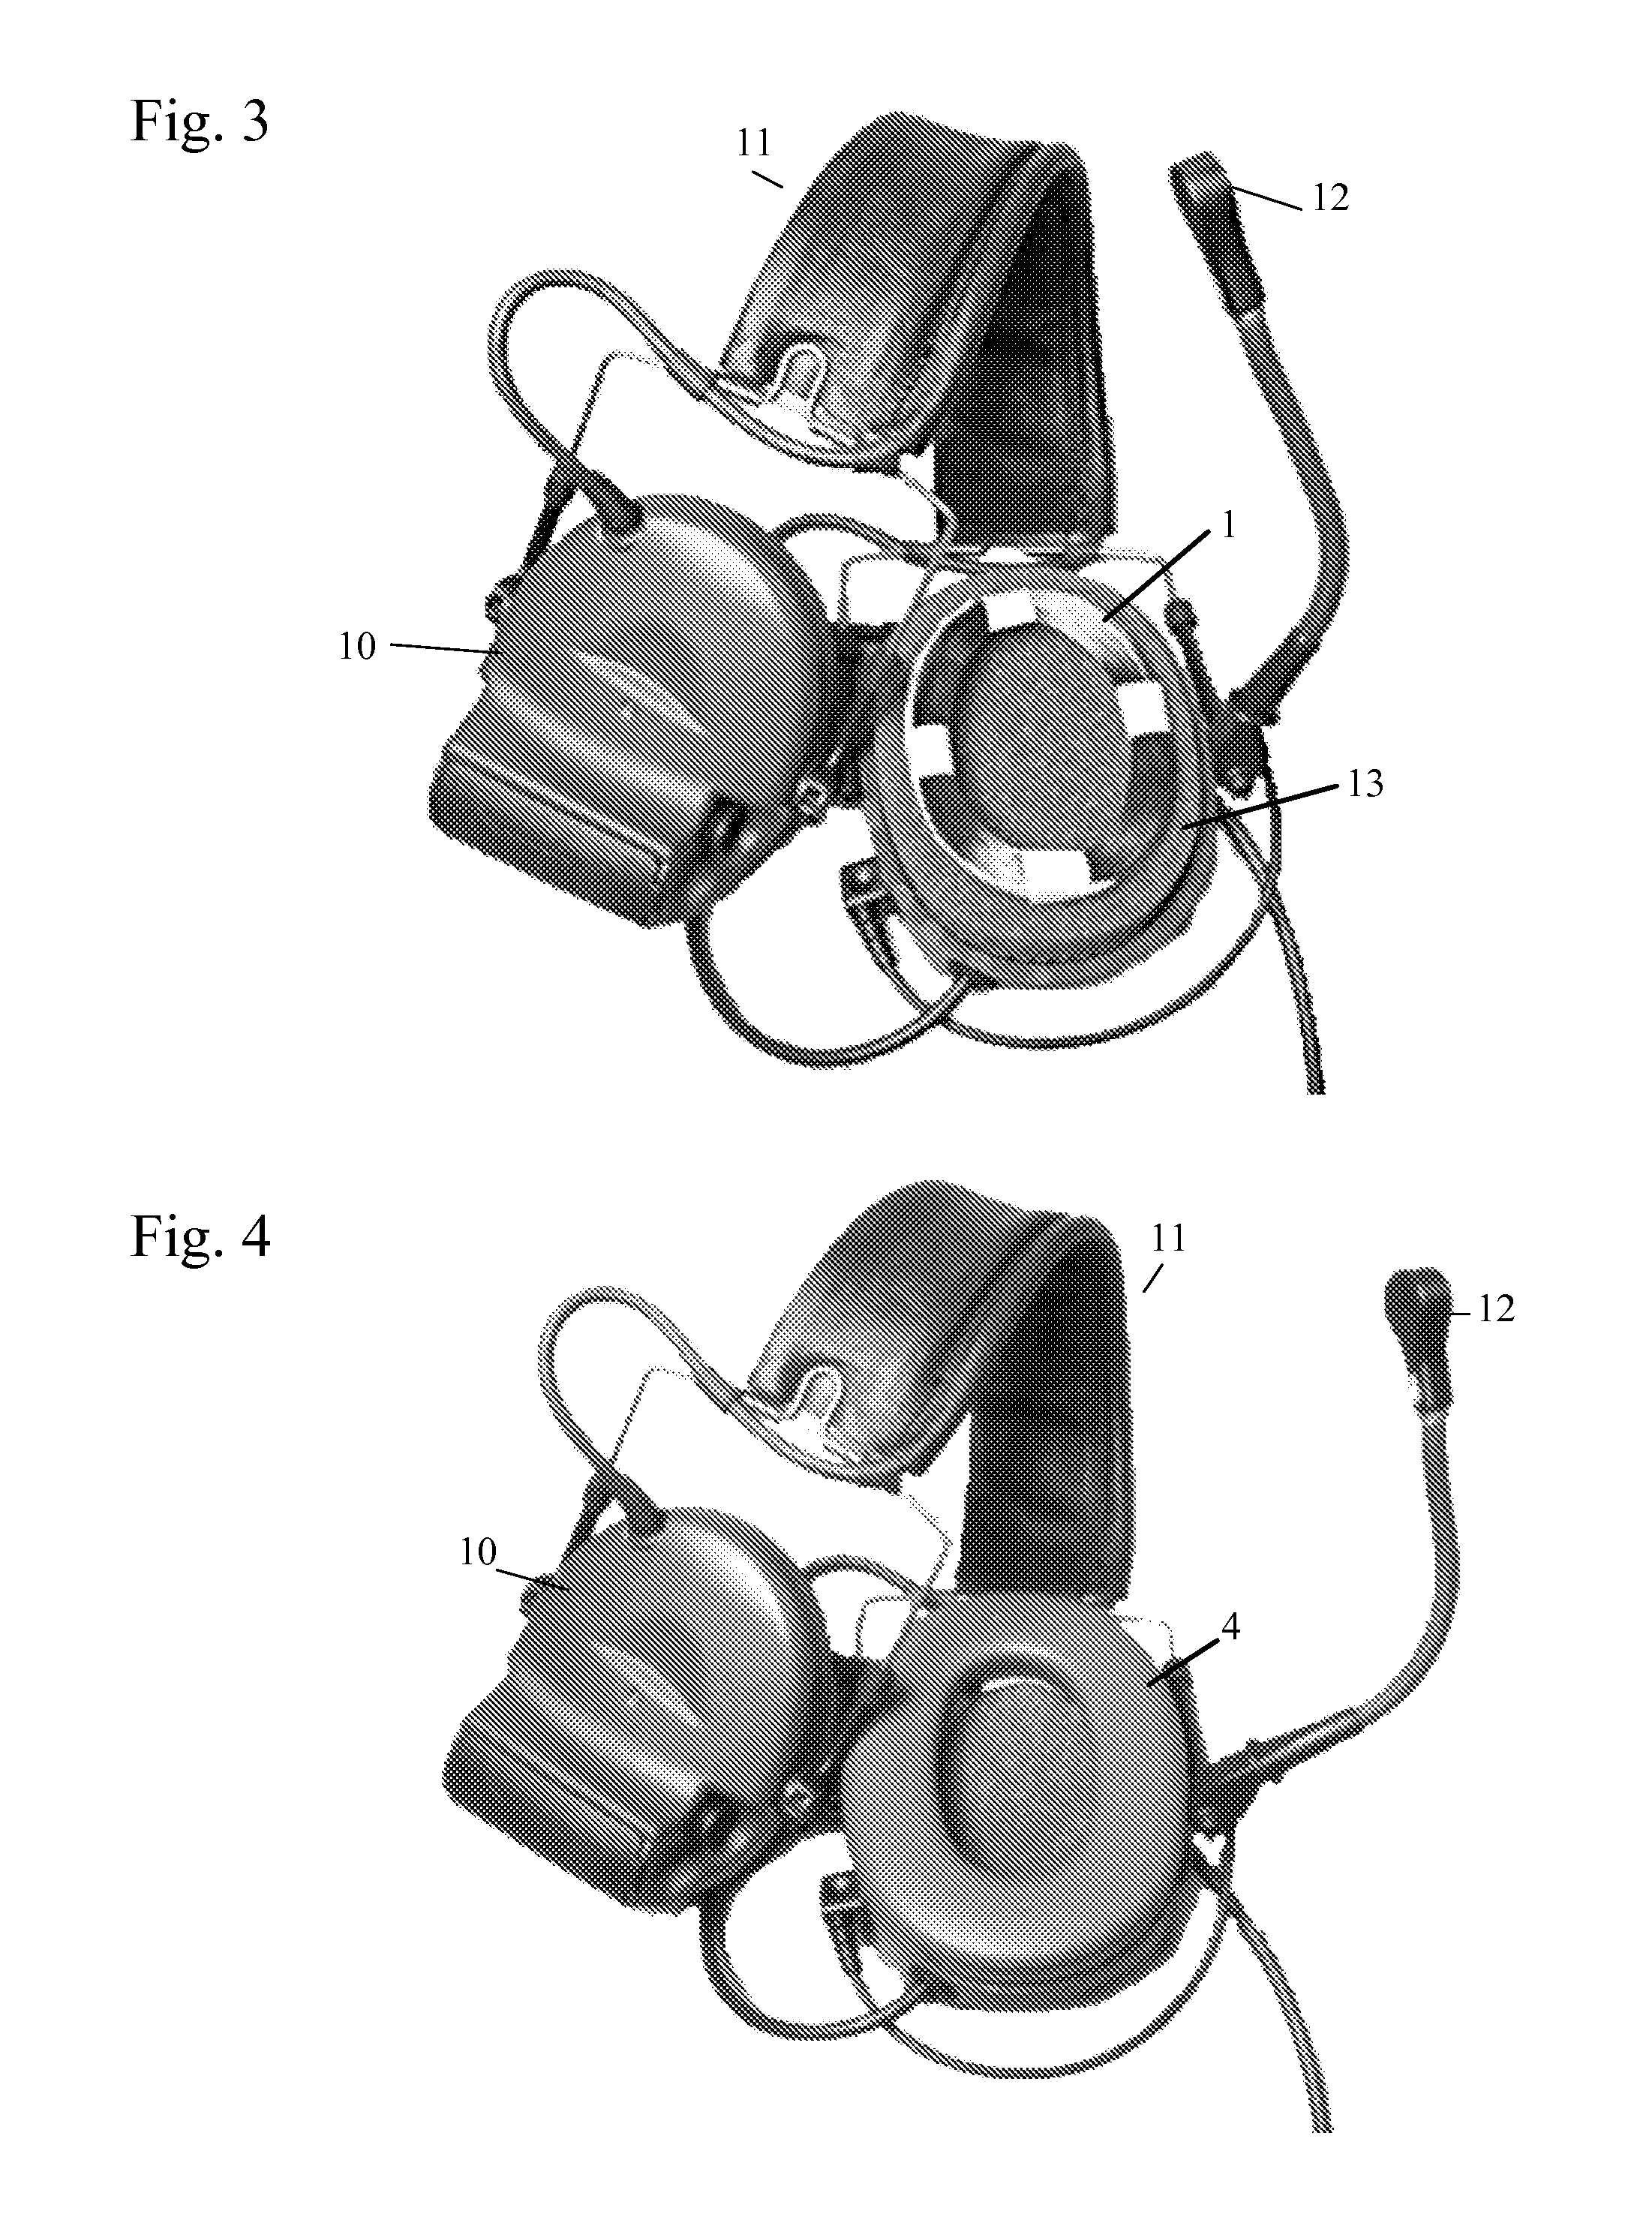 Wireless Communications Headset System Employing a Loop Transmitter that Fits Around the Pinna